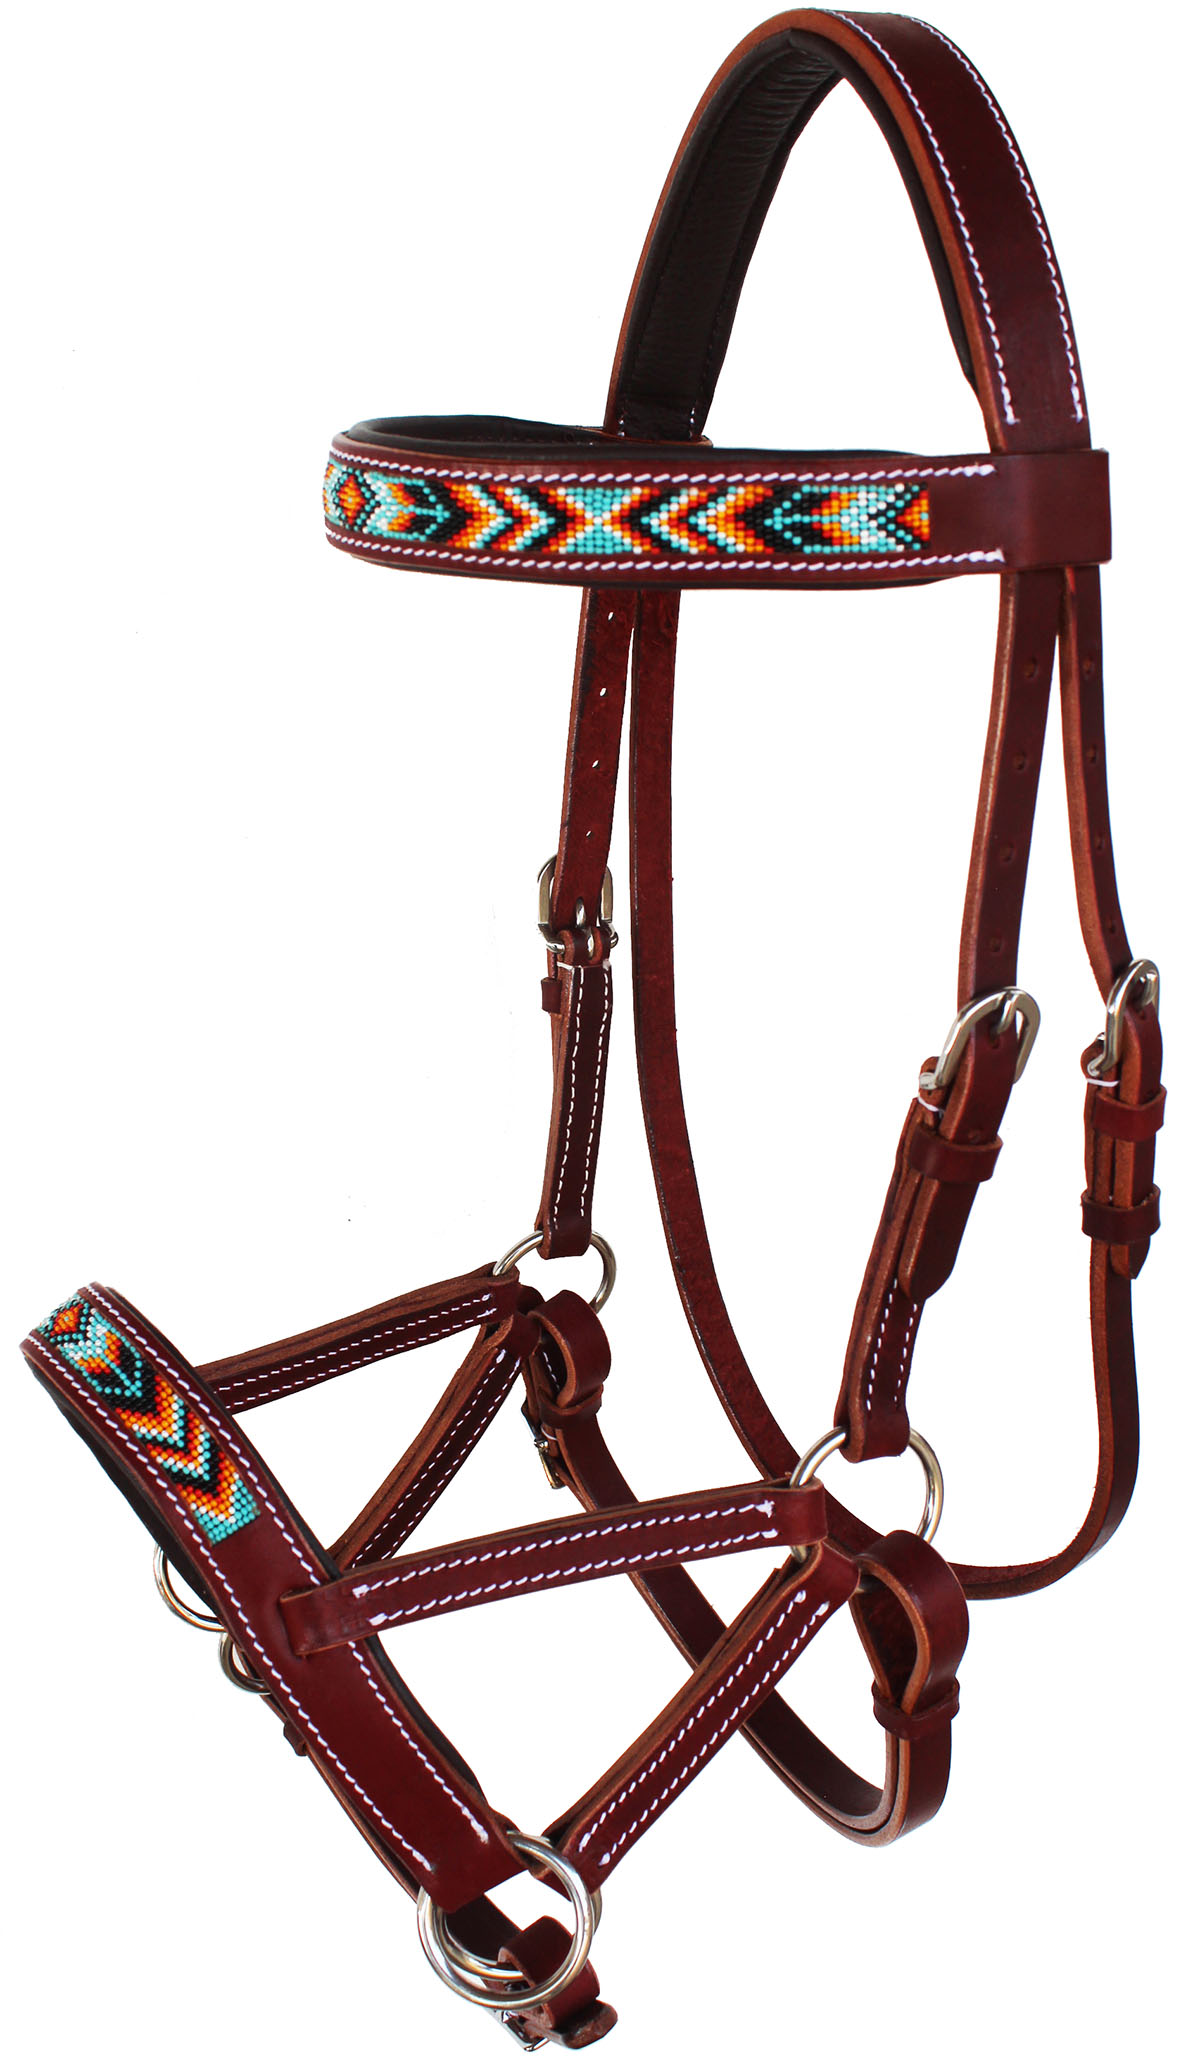 Horse Western Leather Beaded Bitless Sidepull Bridle Reins 77RS22MG-F | eBay